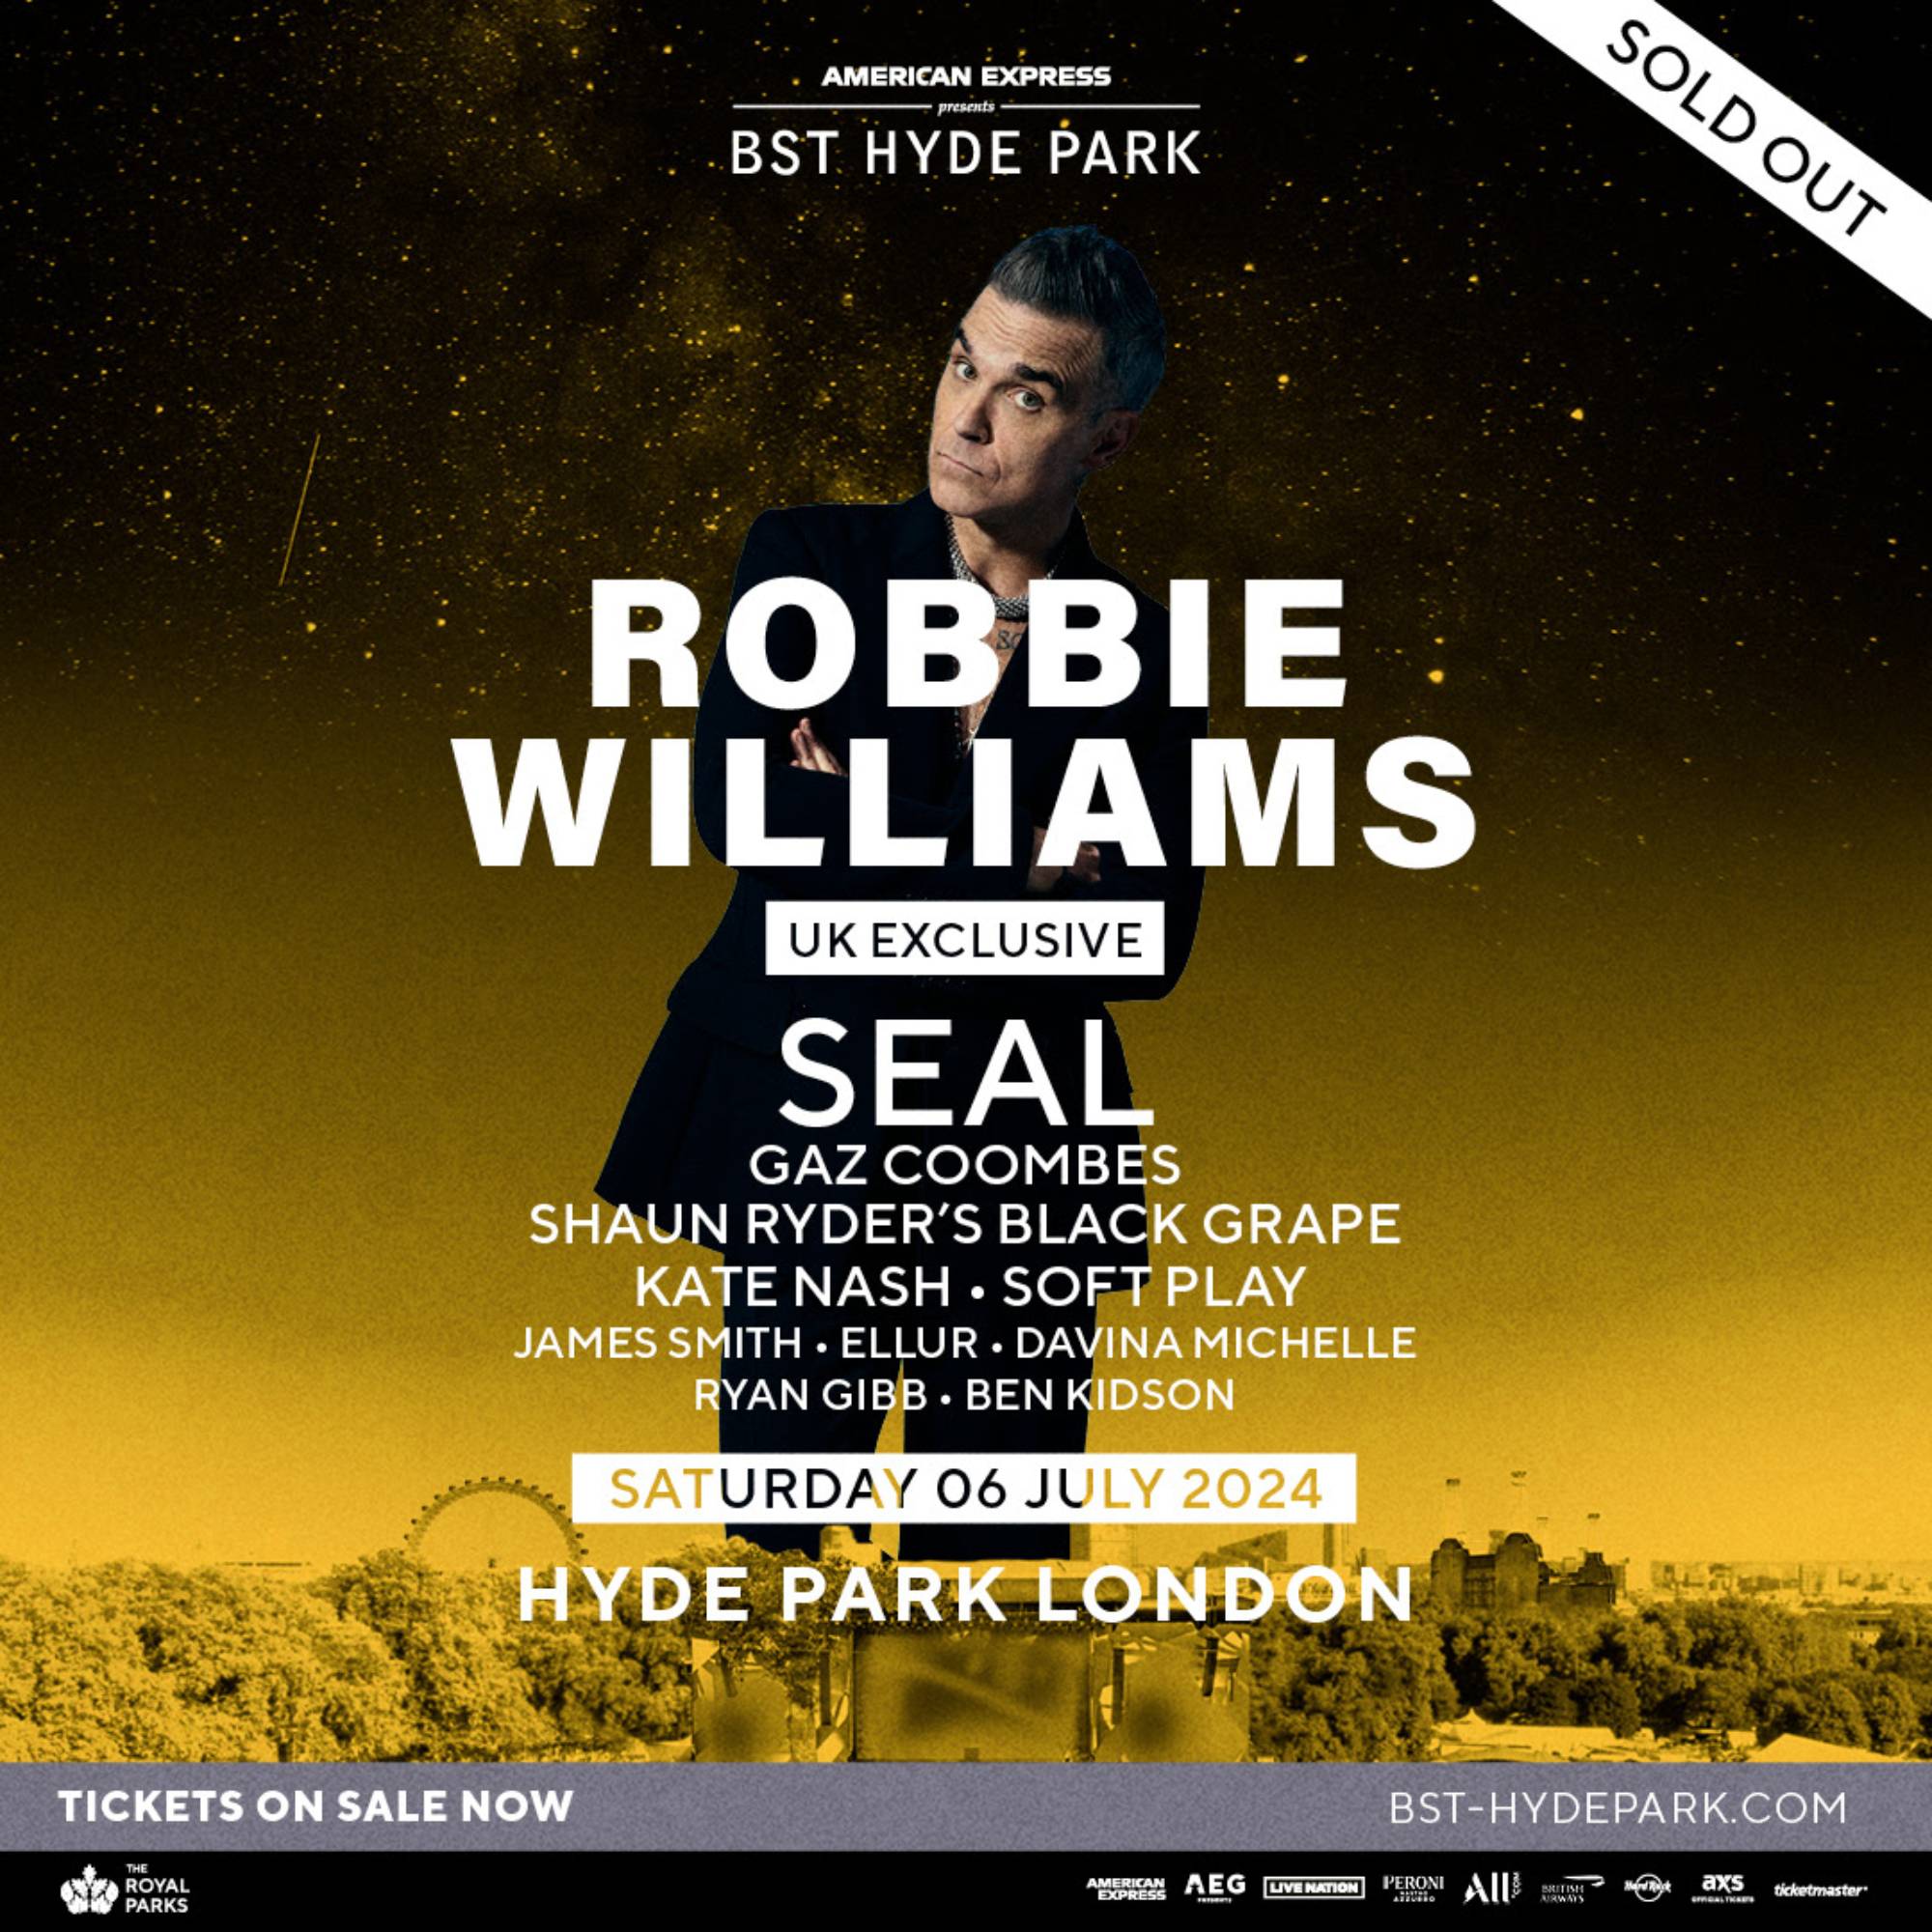 Robbie Williams BST Hyde Park poster. Credit: PRESS